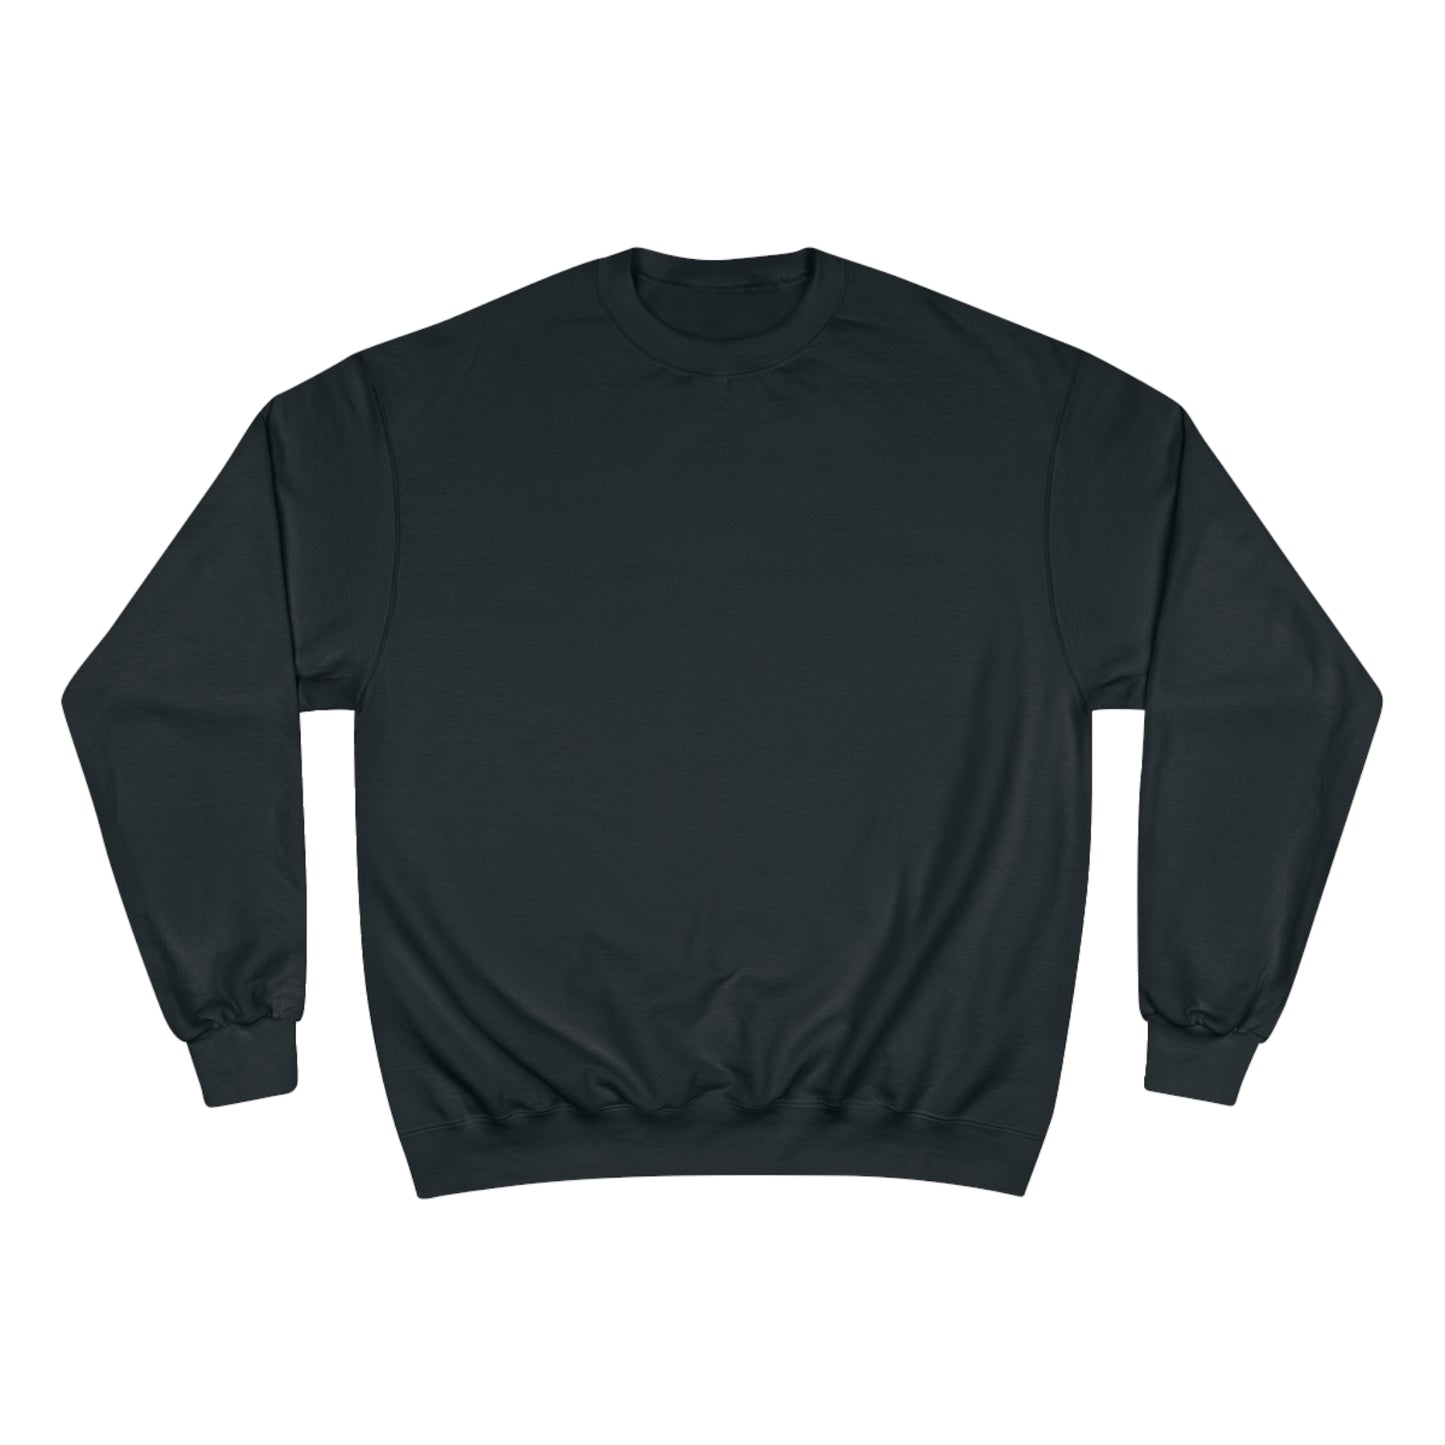 front side black sweatshirt with no print